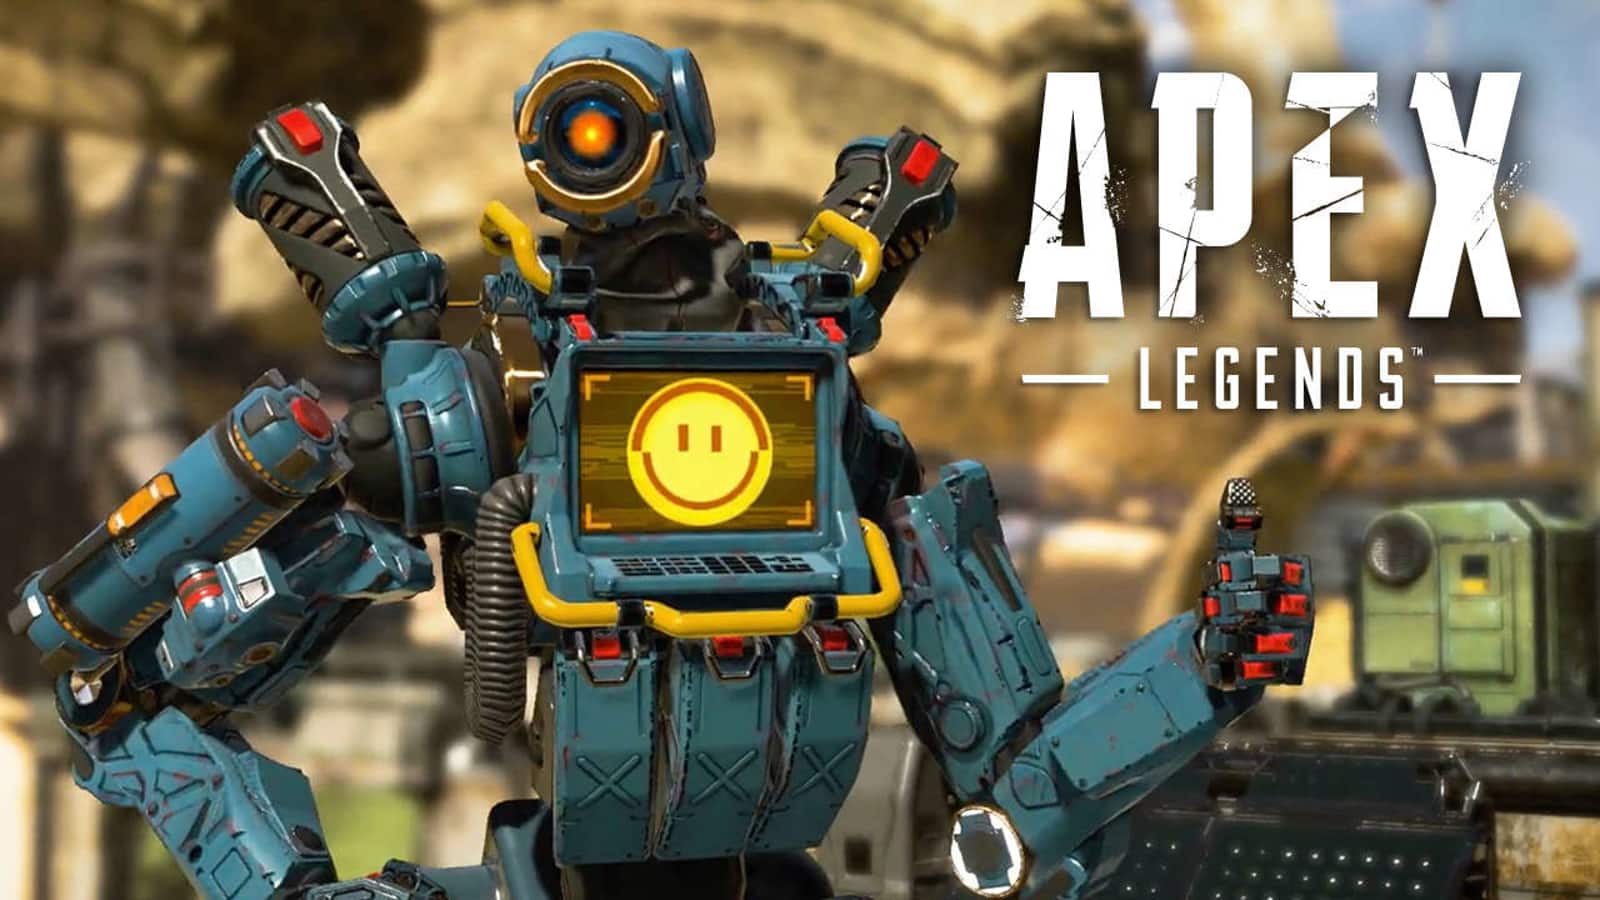 Pathfinder from Apex Legends gives the camera a thumbs up